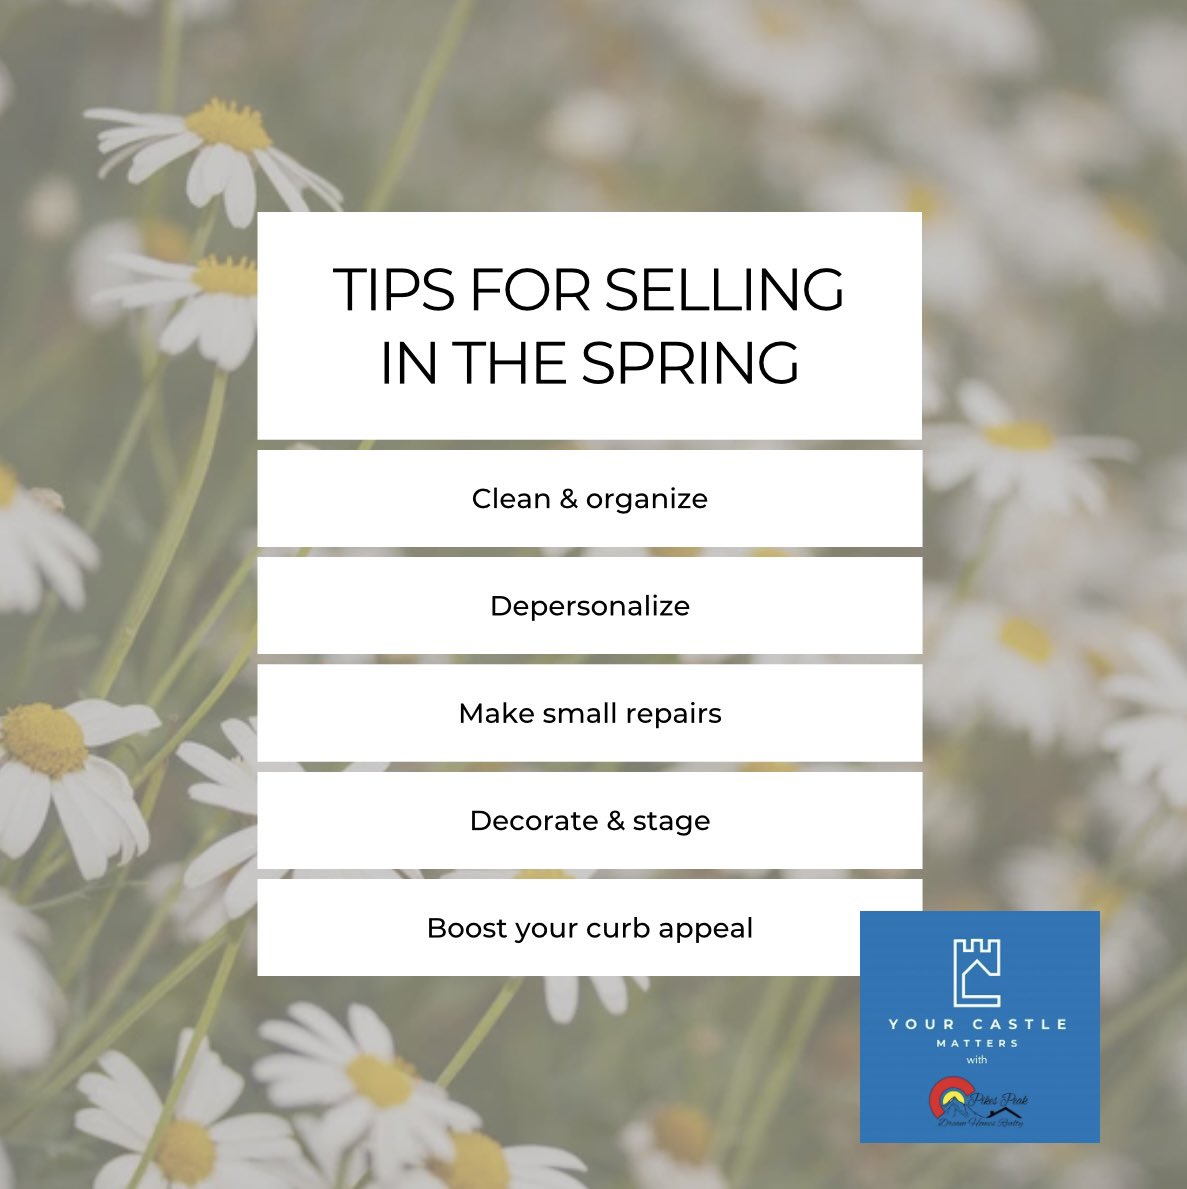 Ready to sell your house this spring? Let's make it happen! Here are 5 tips from a real estate agent: 
#realestateagent #homesellingtips #springmarket #yourcastlematters #p4p #providing4providers #coloradoliving #realestate #investinyou #homesweethome #Godisgood